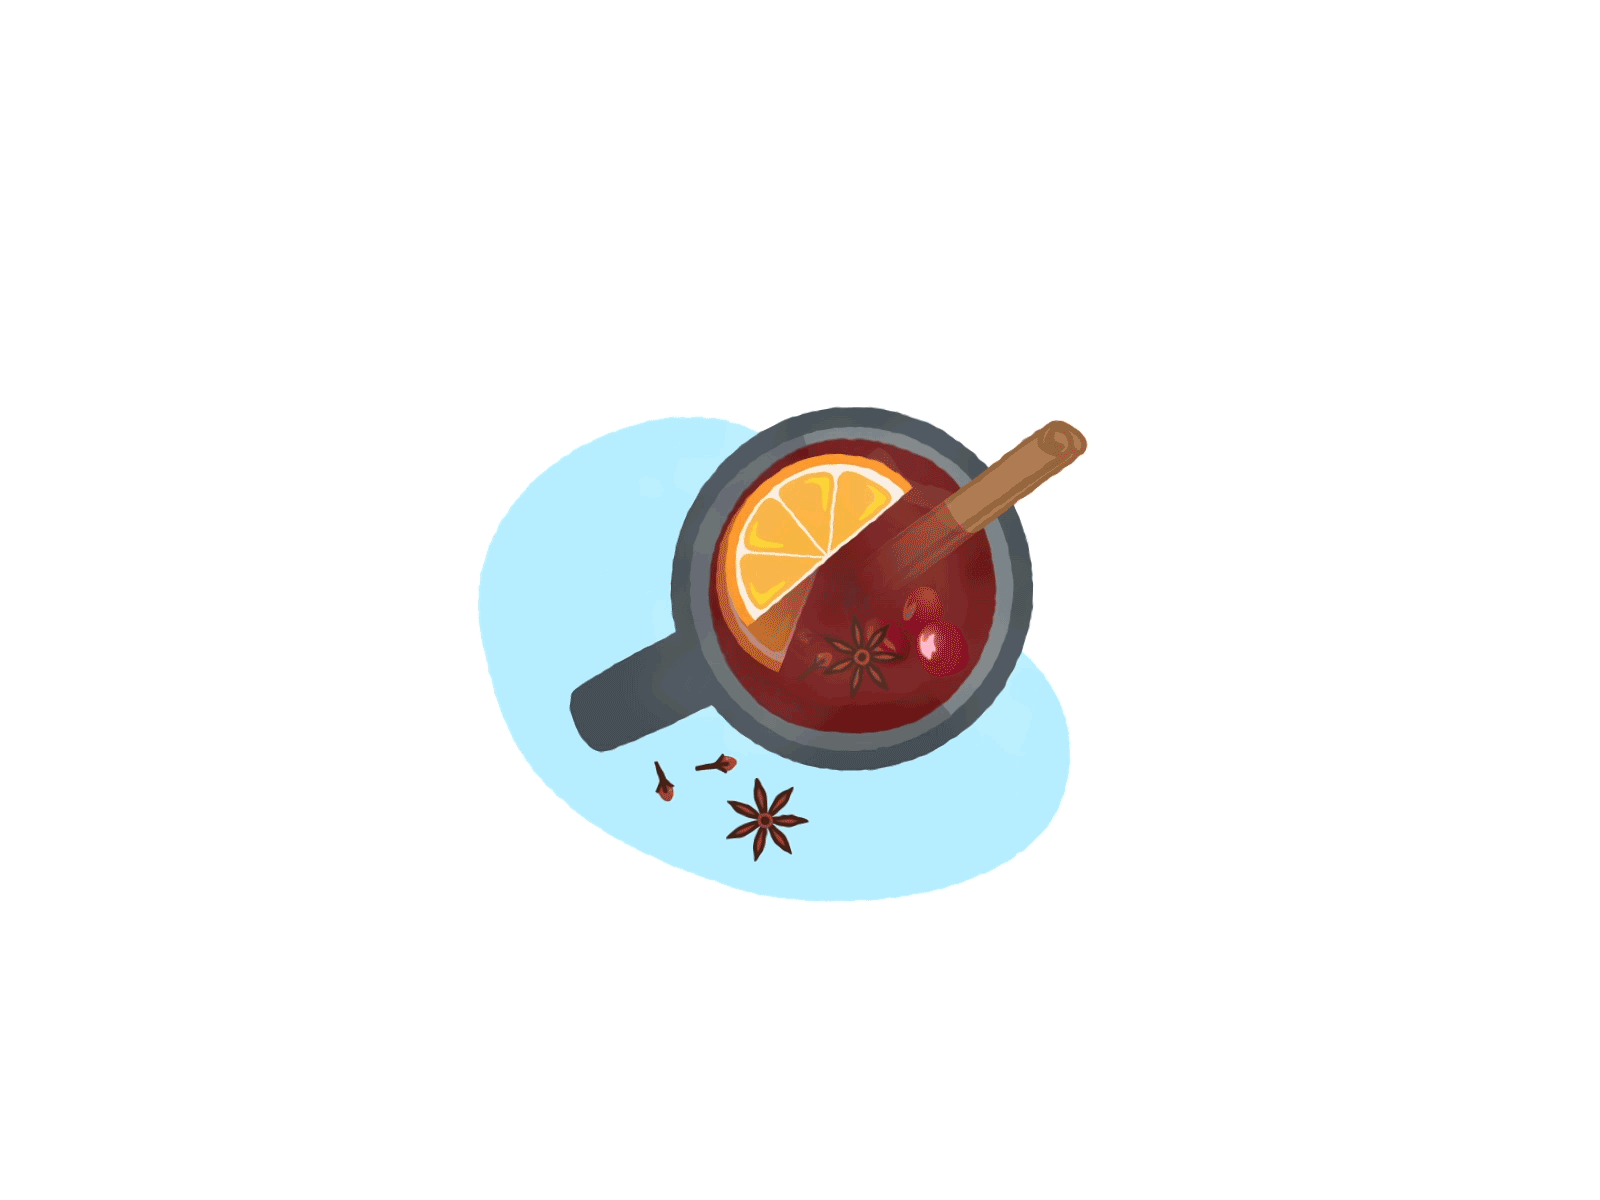 Mulled wine 🍷